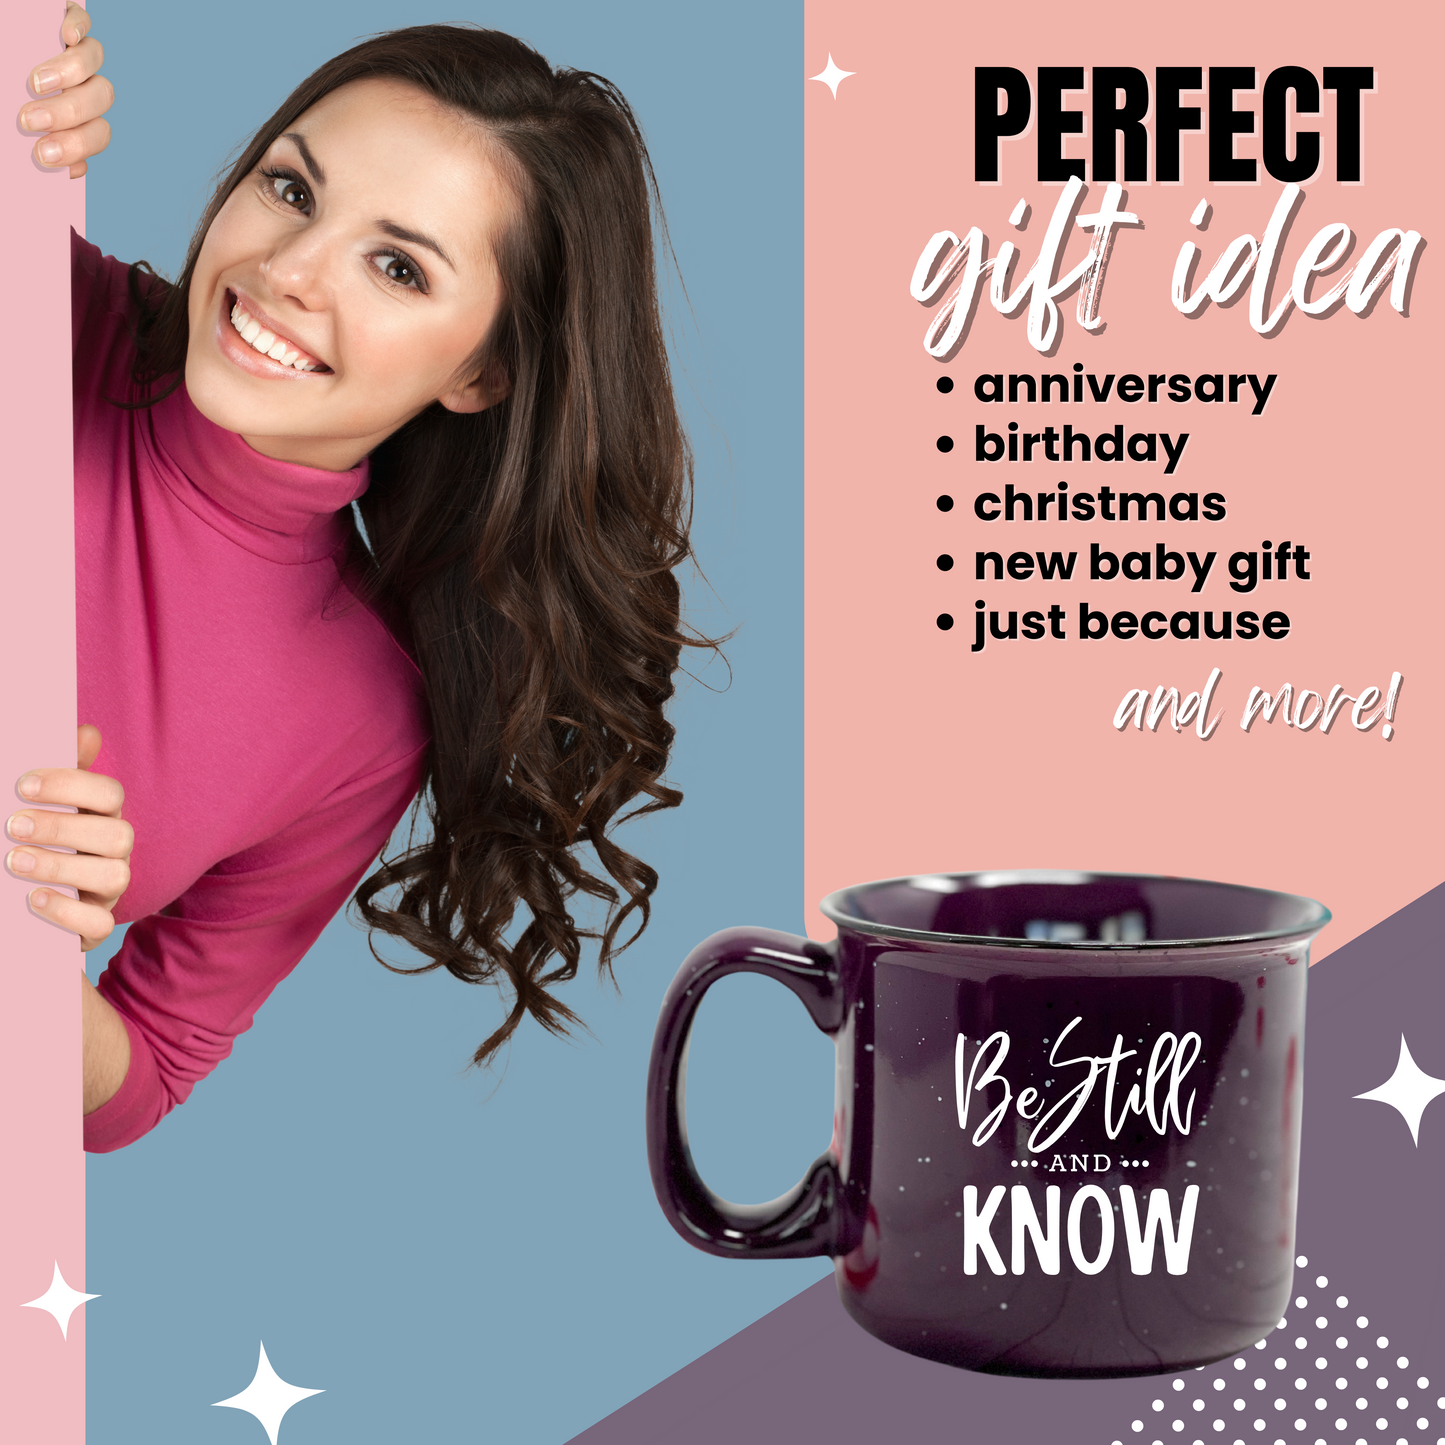 Cute Inspirational Motivational Coffee Mugs for Women - Unique Fun Gifts for Her, Wife, Friend, Mom, Sister, Teacher, Coworkers - Coffee Cups & Mugs with Quotes (Be Still and Know Plum)